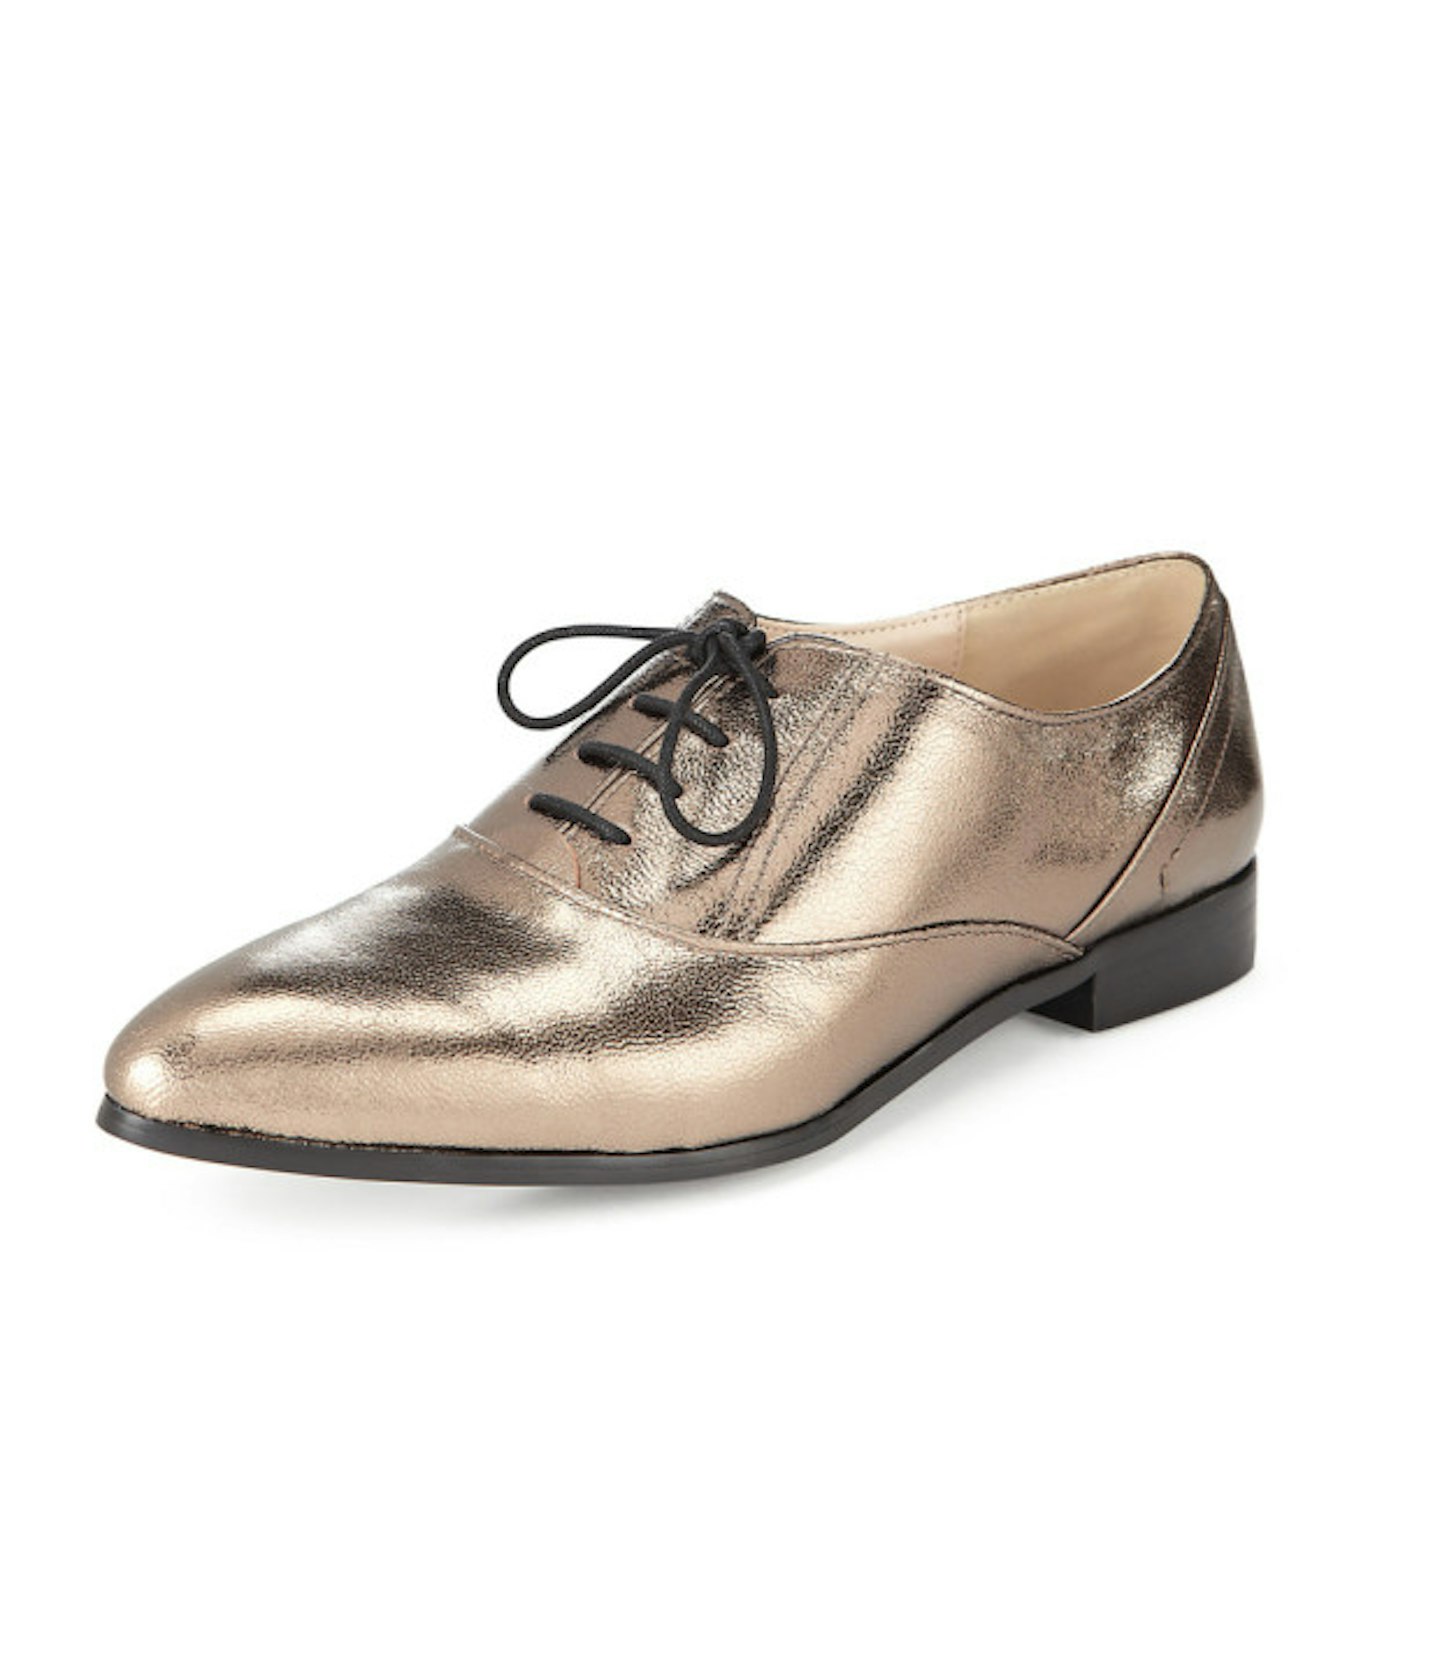 Metallic pointy brogues